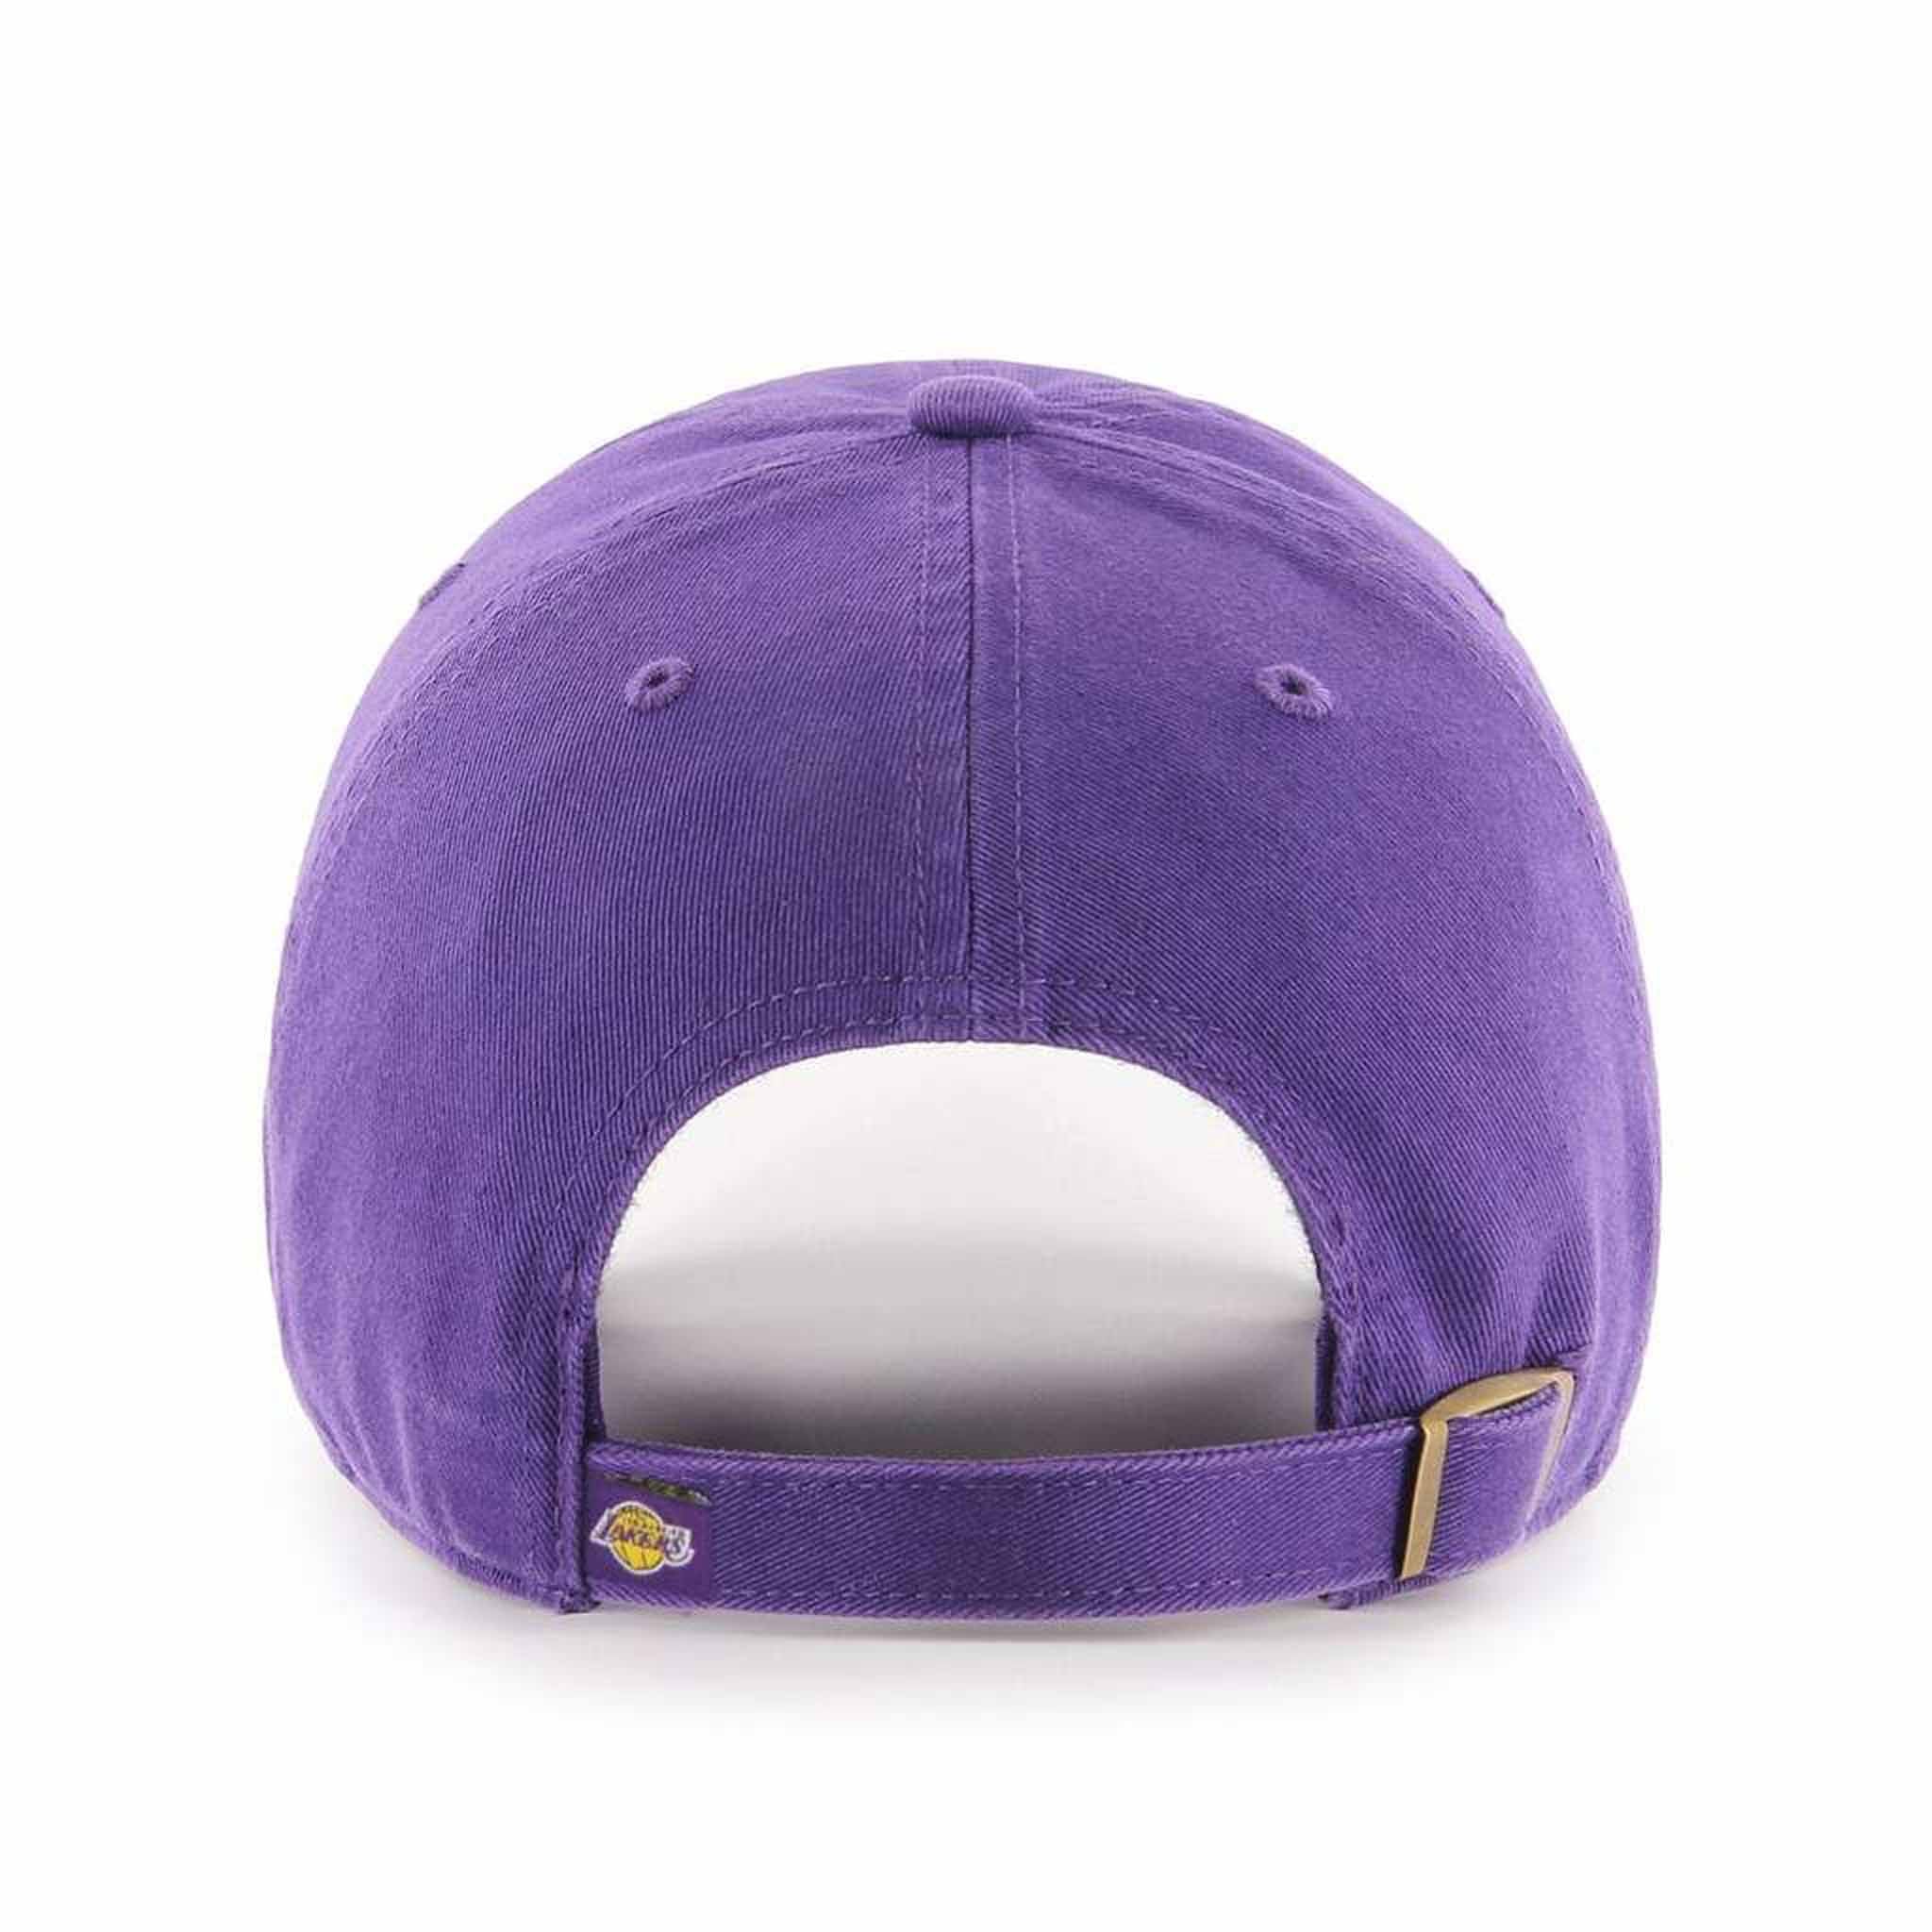 47 Brand, Accessories, 47 Brand Nba Lakers Hat